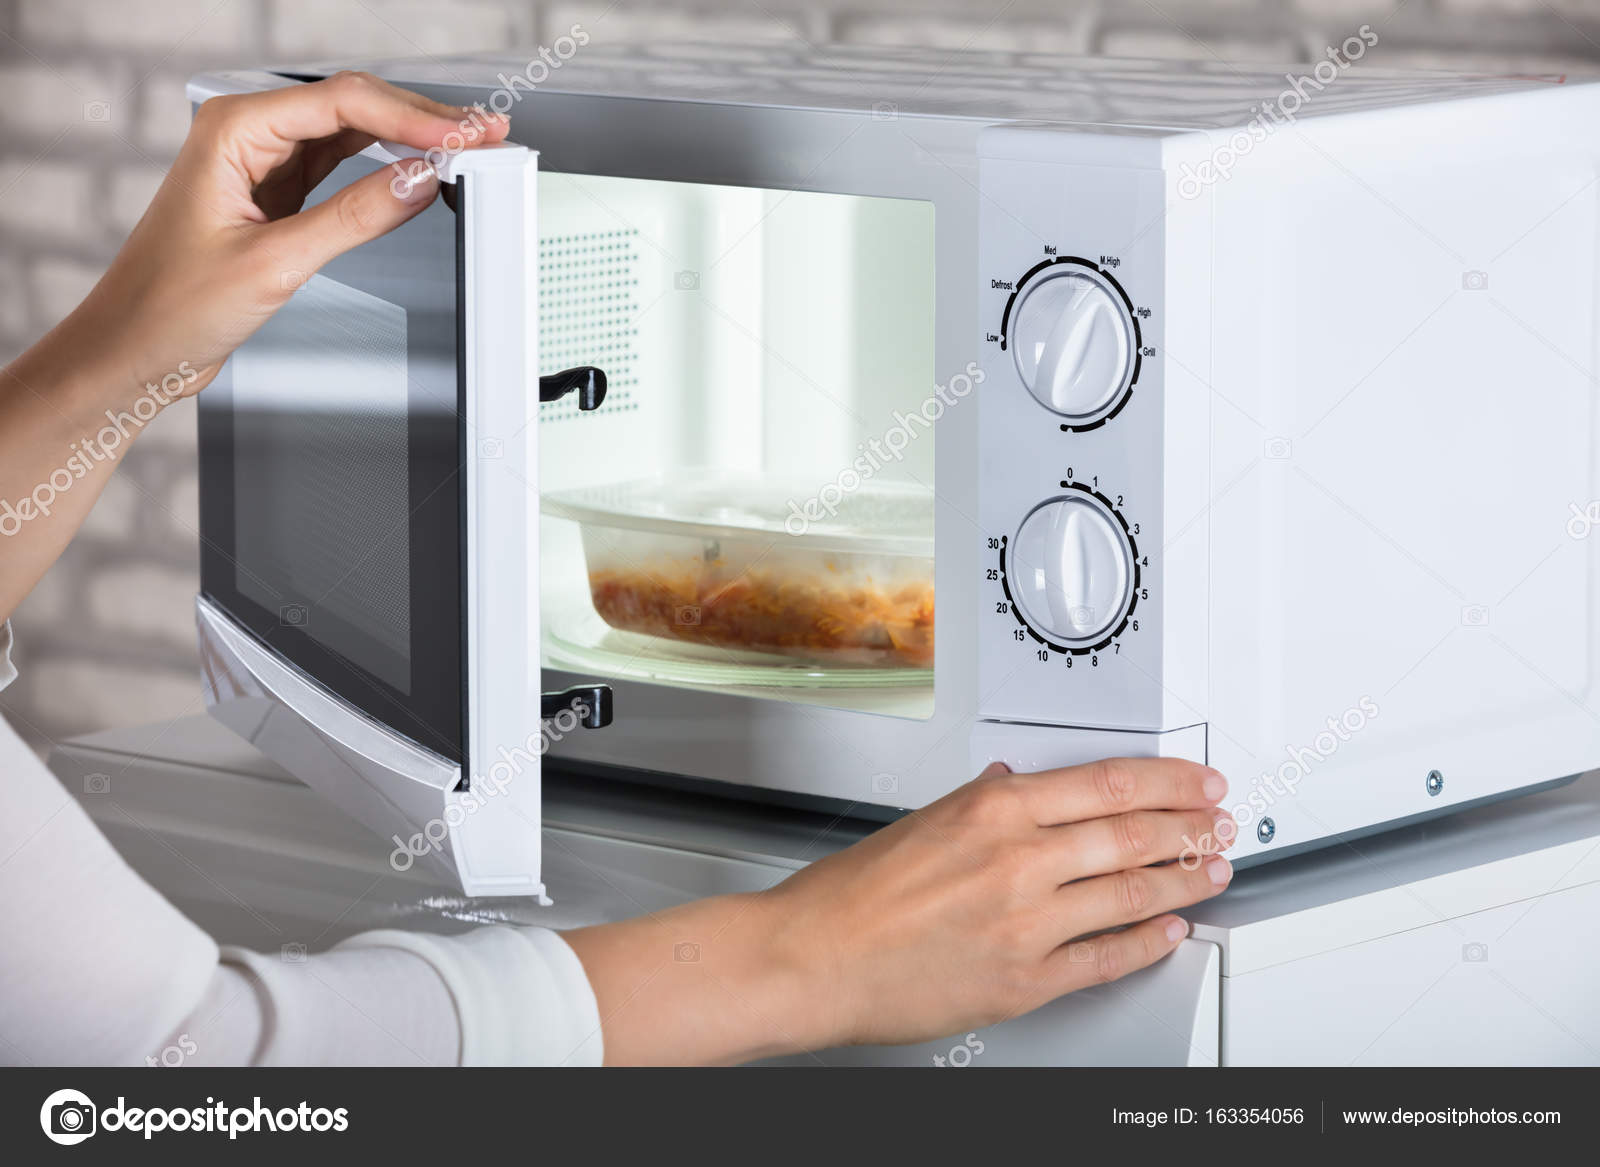 Woman Closing Microwave Oven — Stock Photo © AndreyPopov #163354056